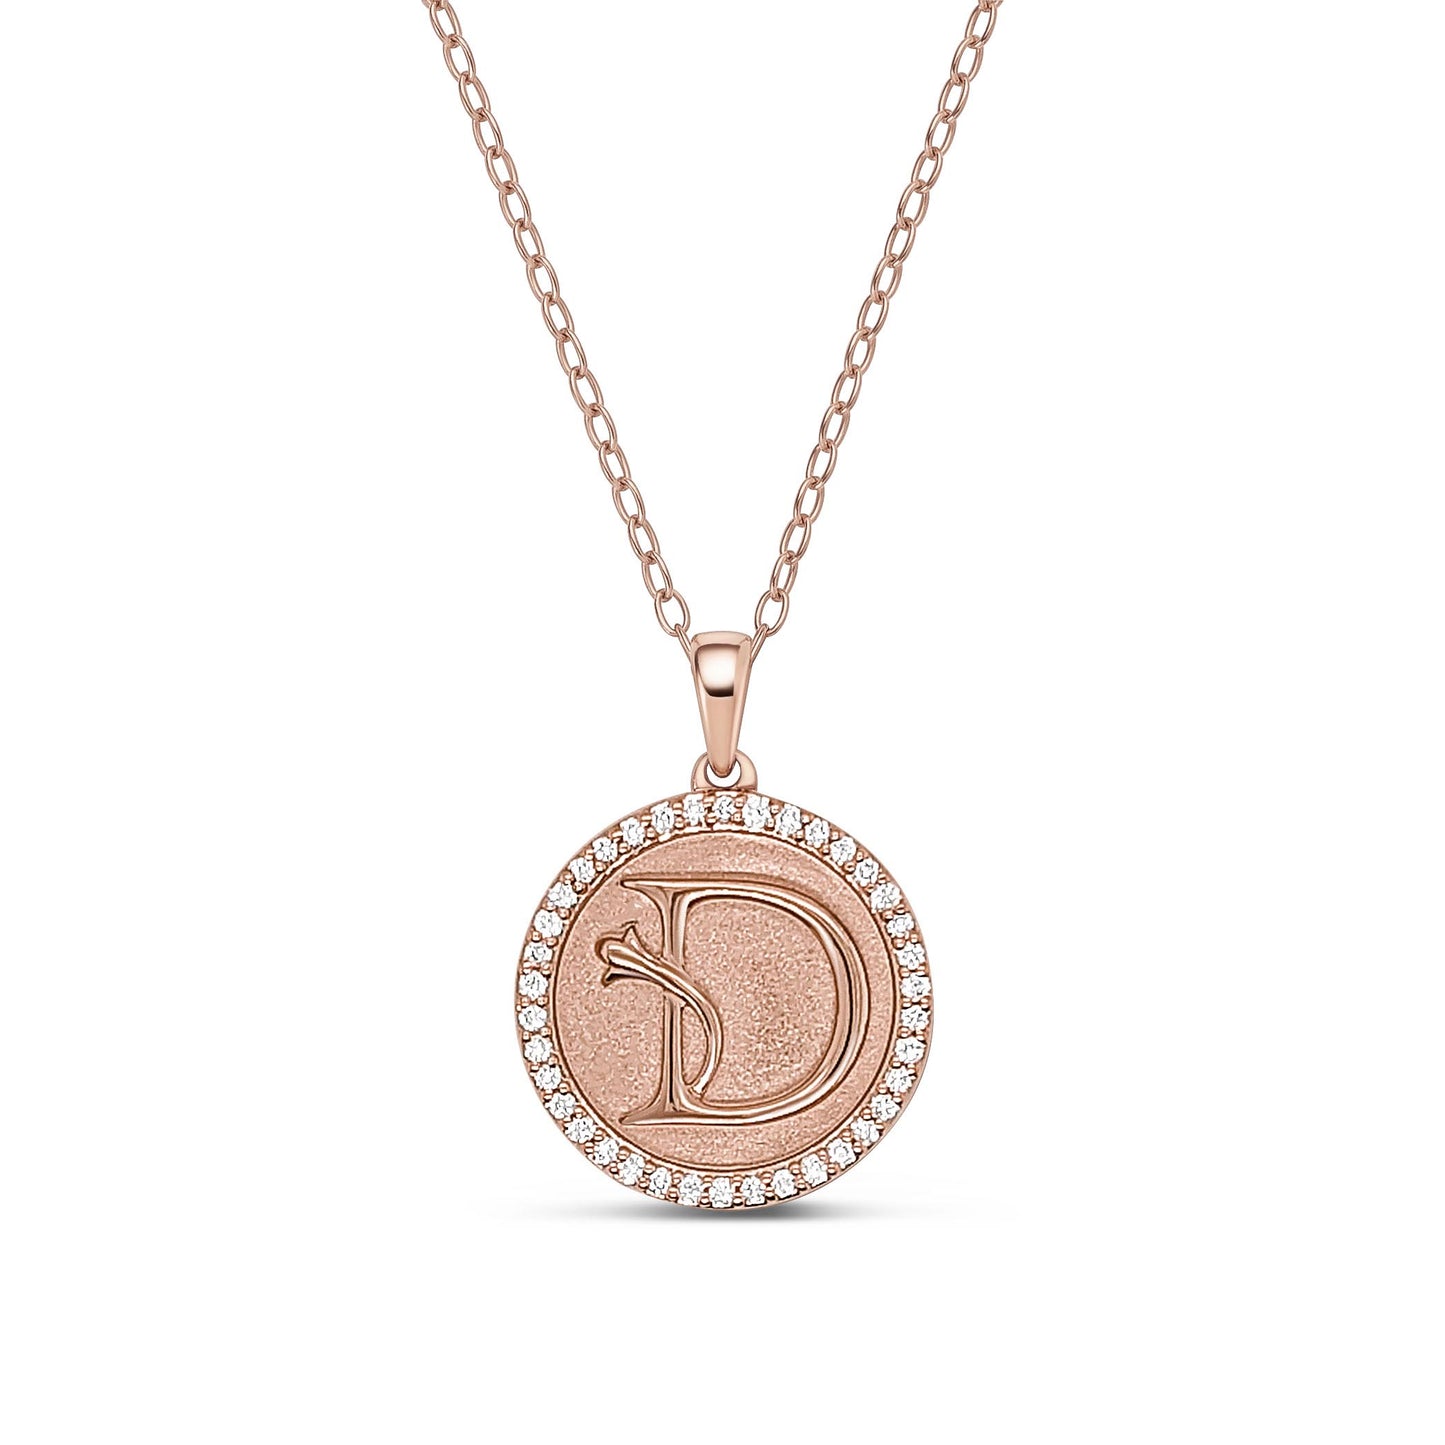 Classic Initial Lab Created Diamond Necklace